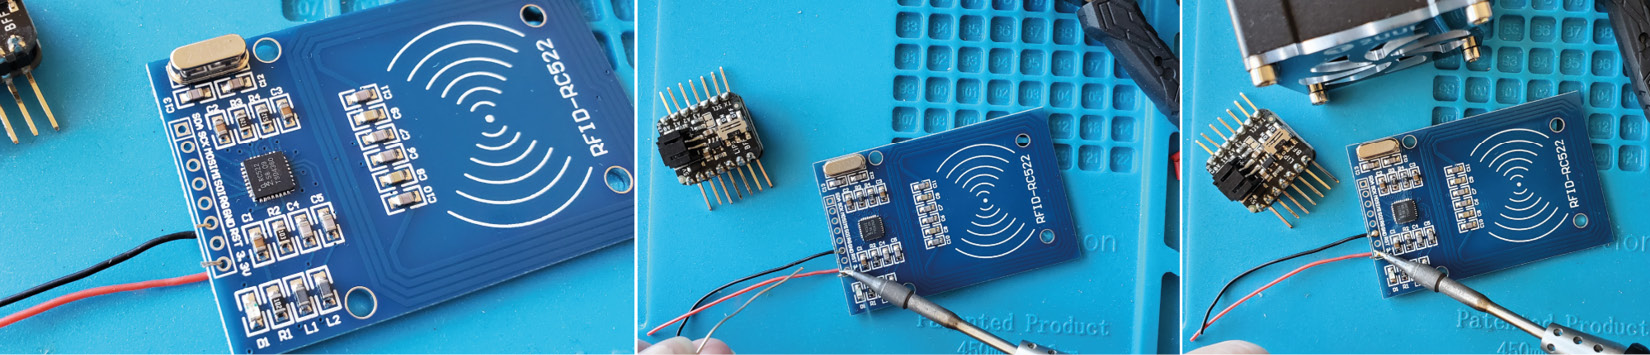 Figure 13.3 – Soldering the ground and power connections on the RFID reader
